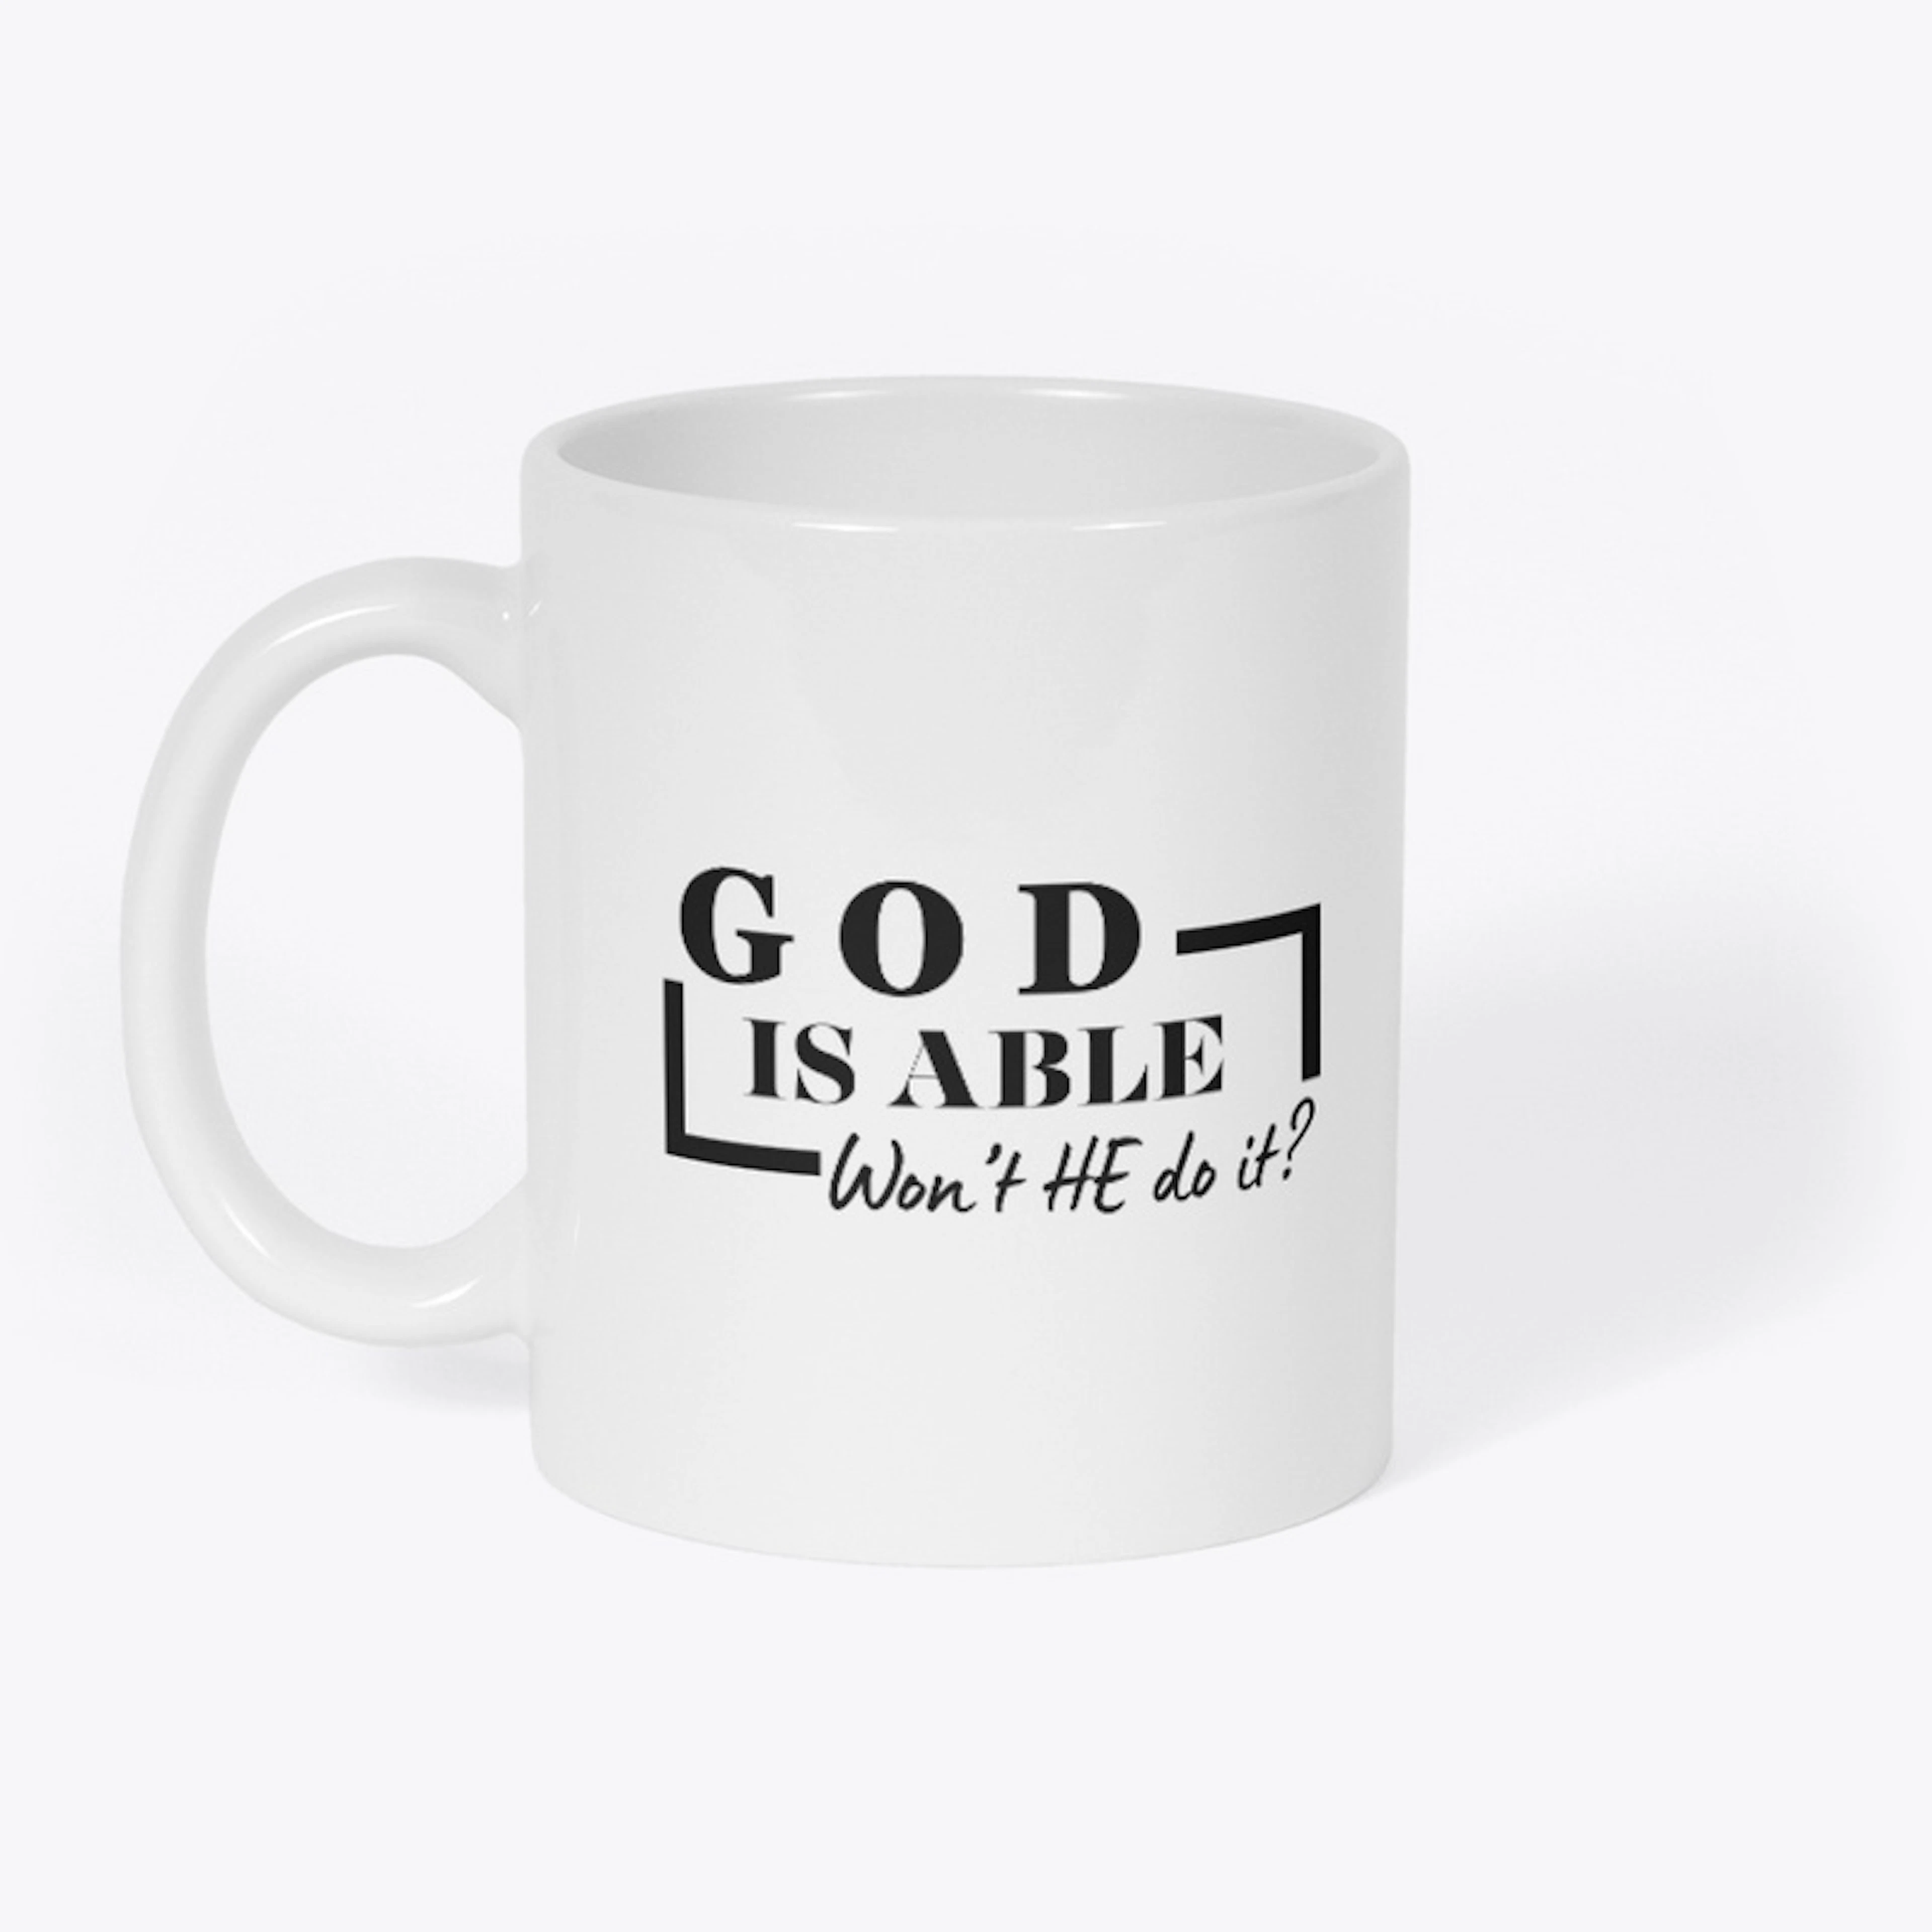 God is Able (Won't He do it?)